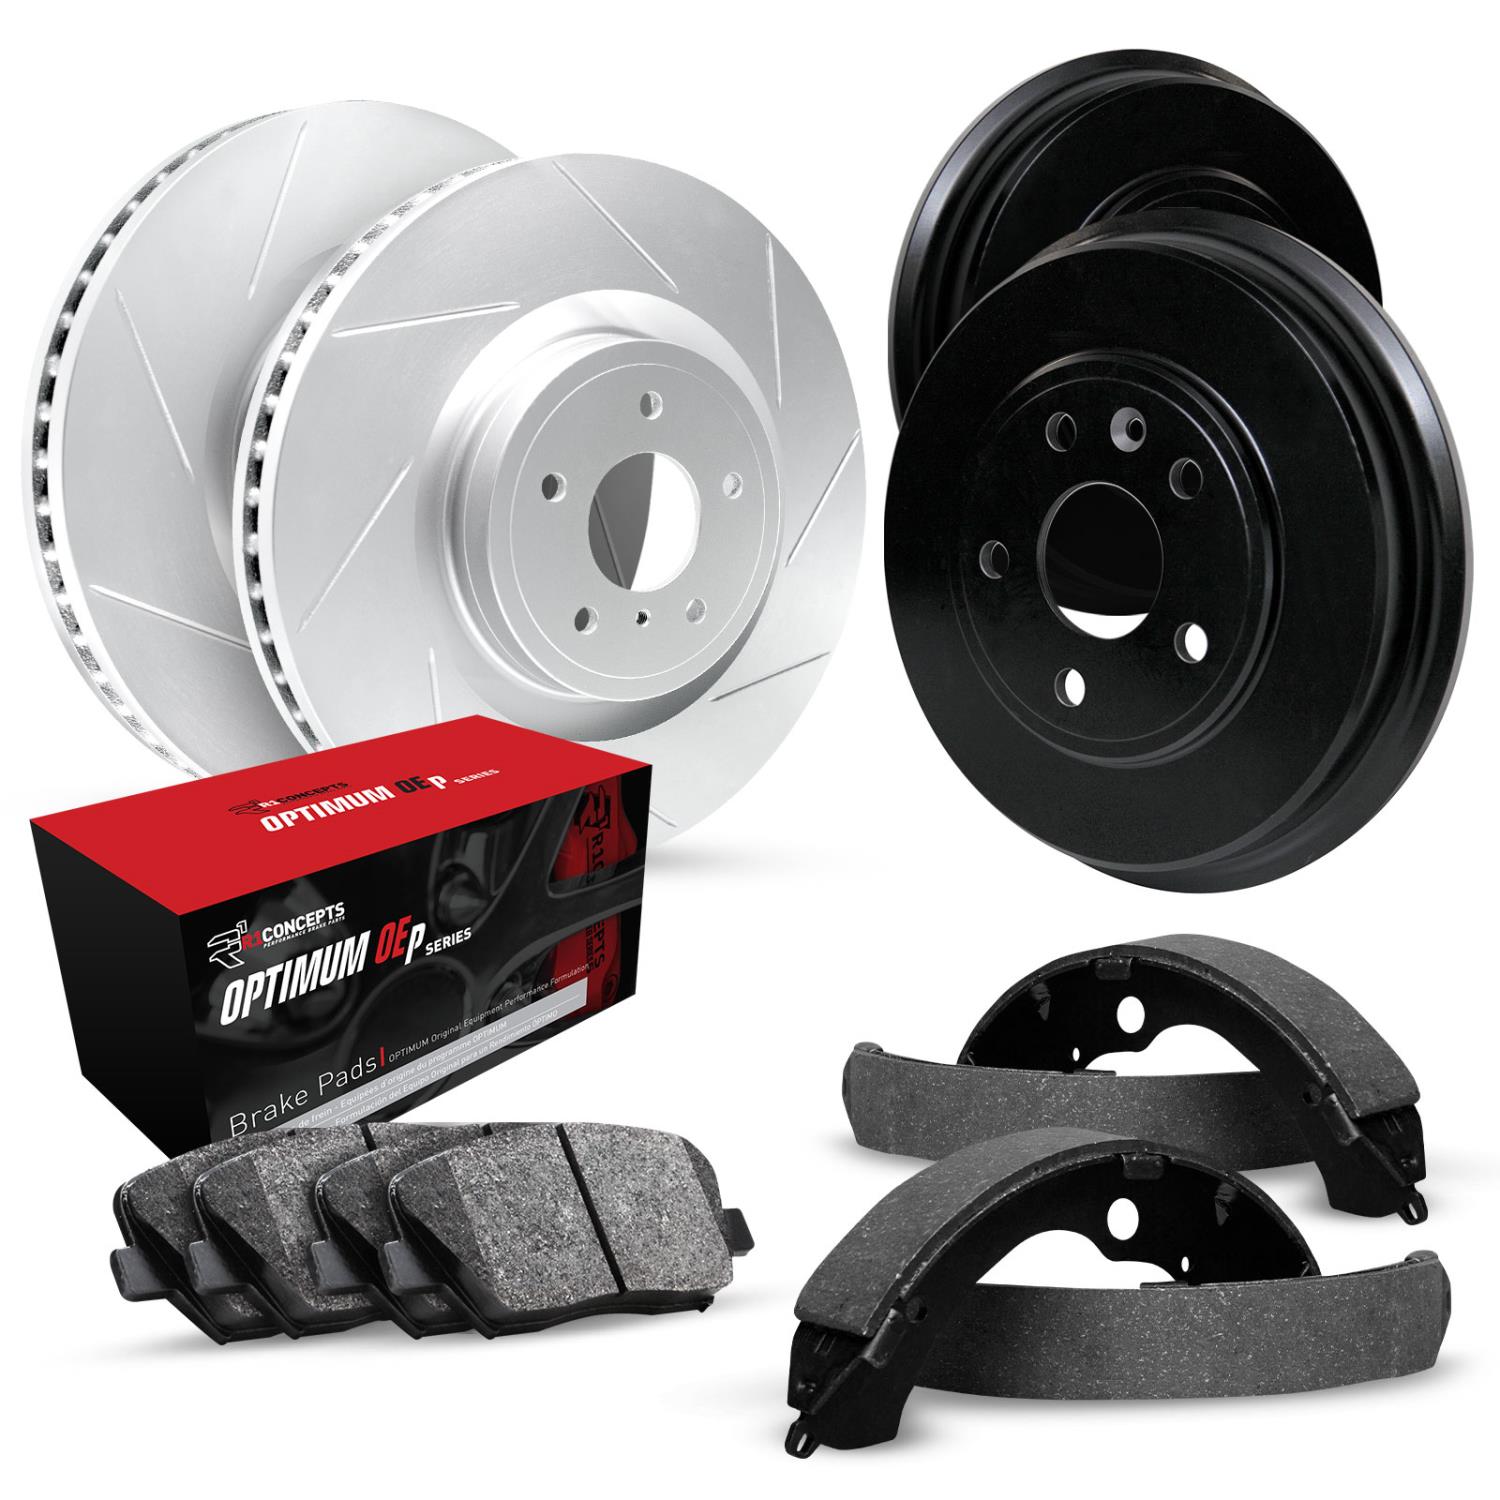 GEO-Carbon Slotted Brake Rotor & Drum Set w/Optimum OE Pads & Shoes, 1971-1982 GM, Position: Front & Rear